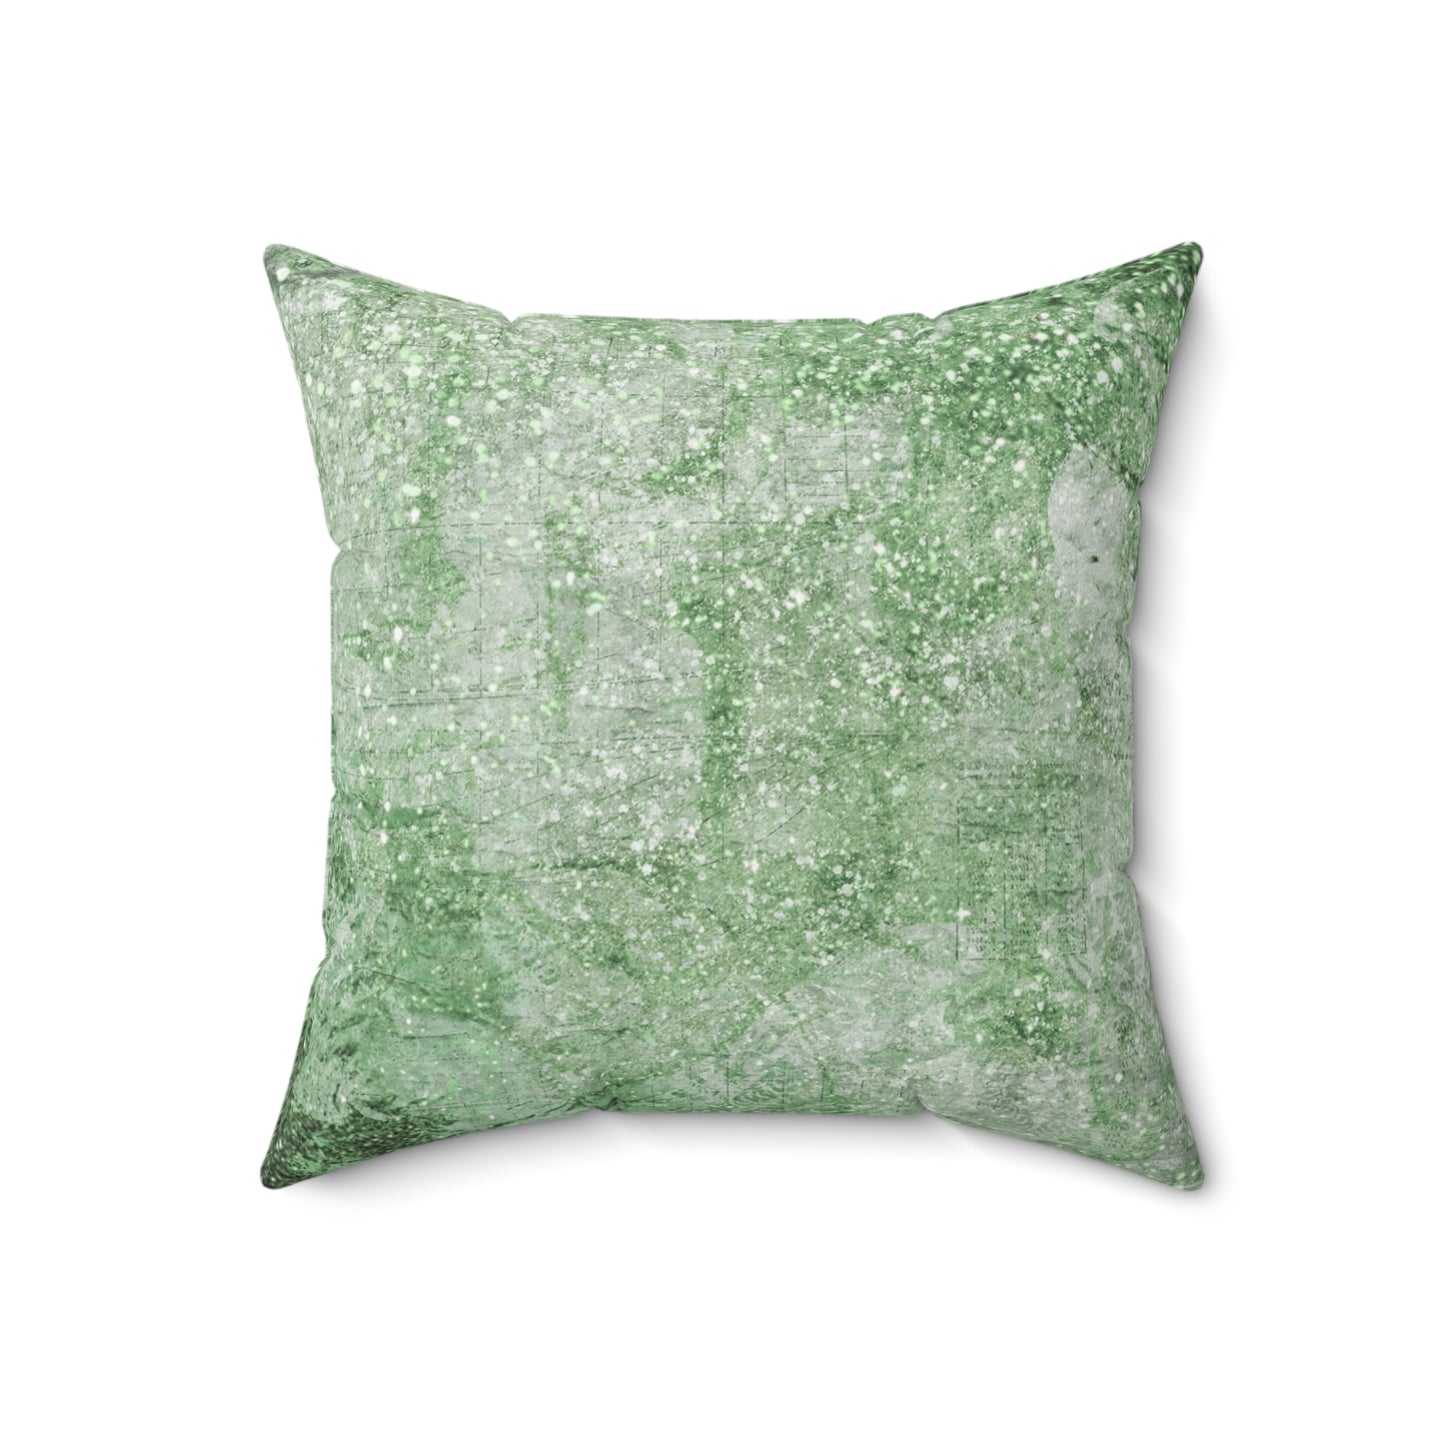 Glimmery Green Crumpled Vintage News Print Style Faux Suede Soft Square Pillow